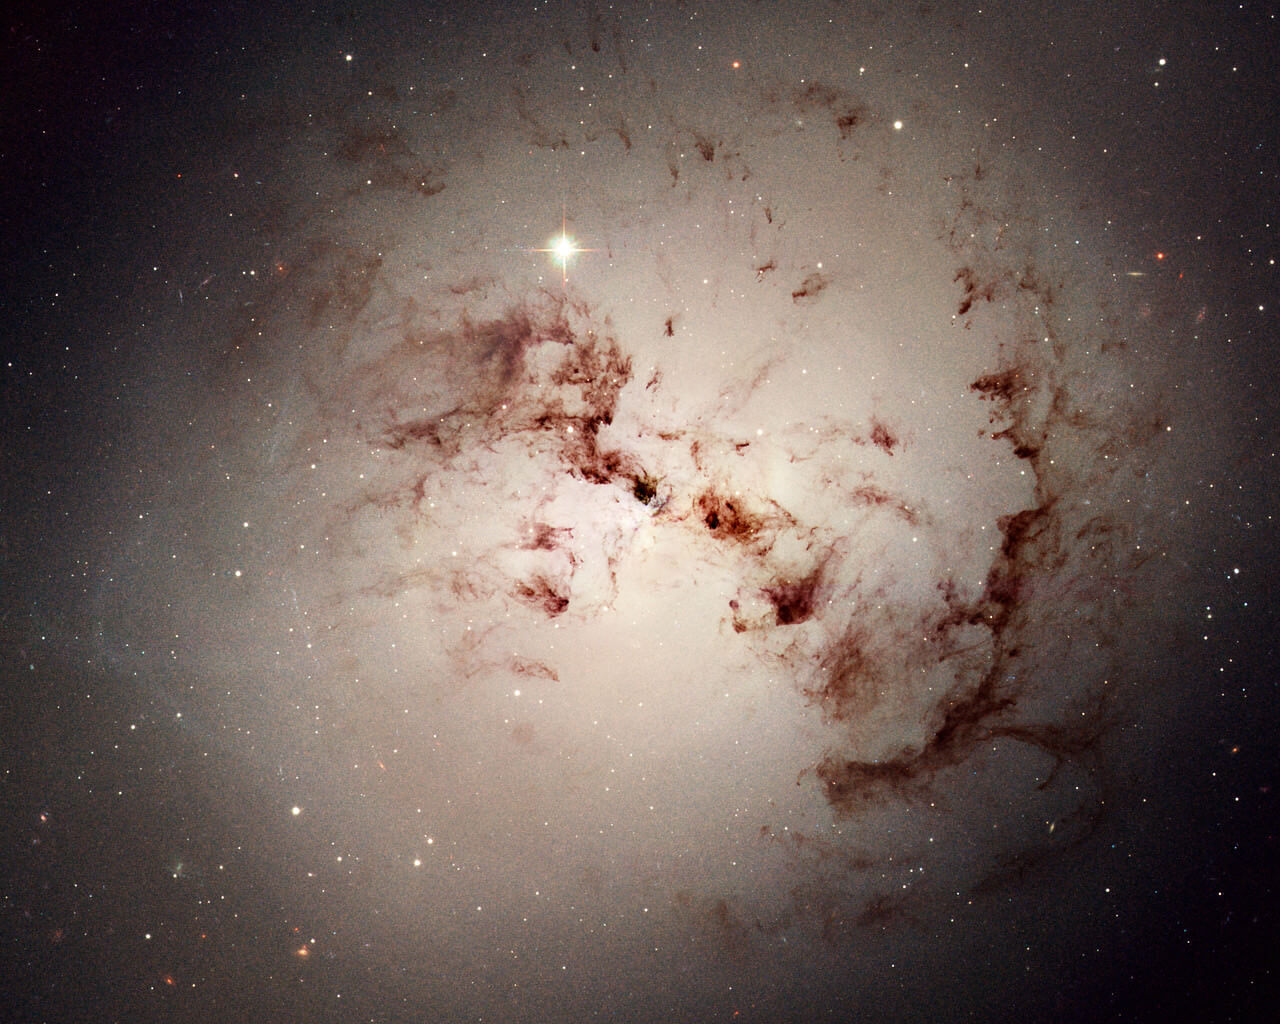 space is so cool - hubble pictures 11 (1)